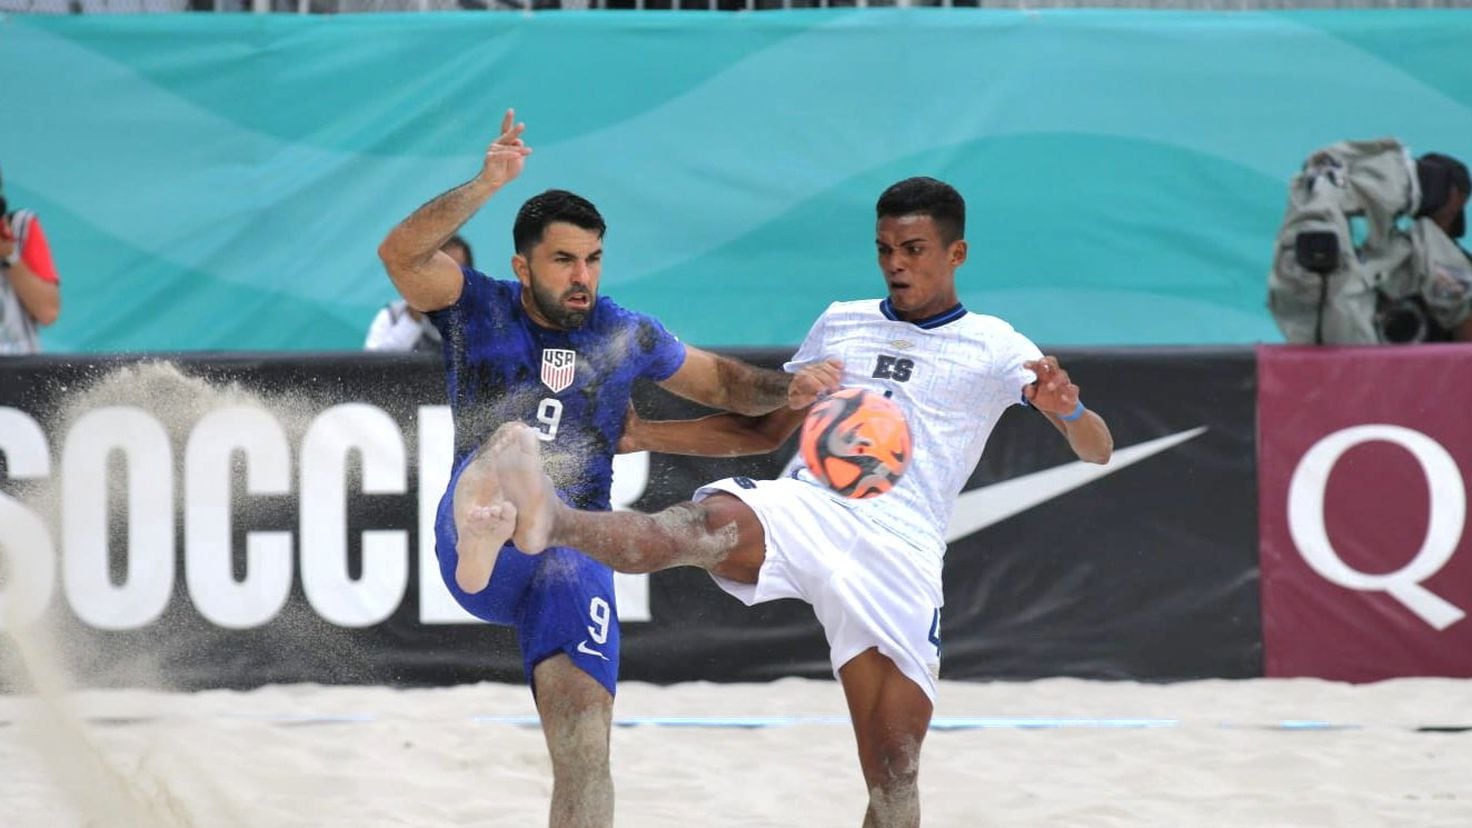 The United States overwhelmingly defeats El Salvador, leaving them without a Beach World Cup